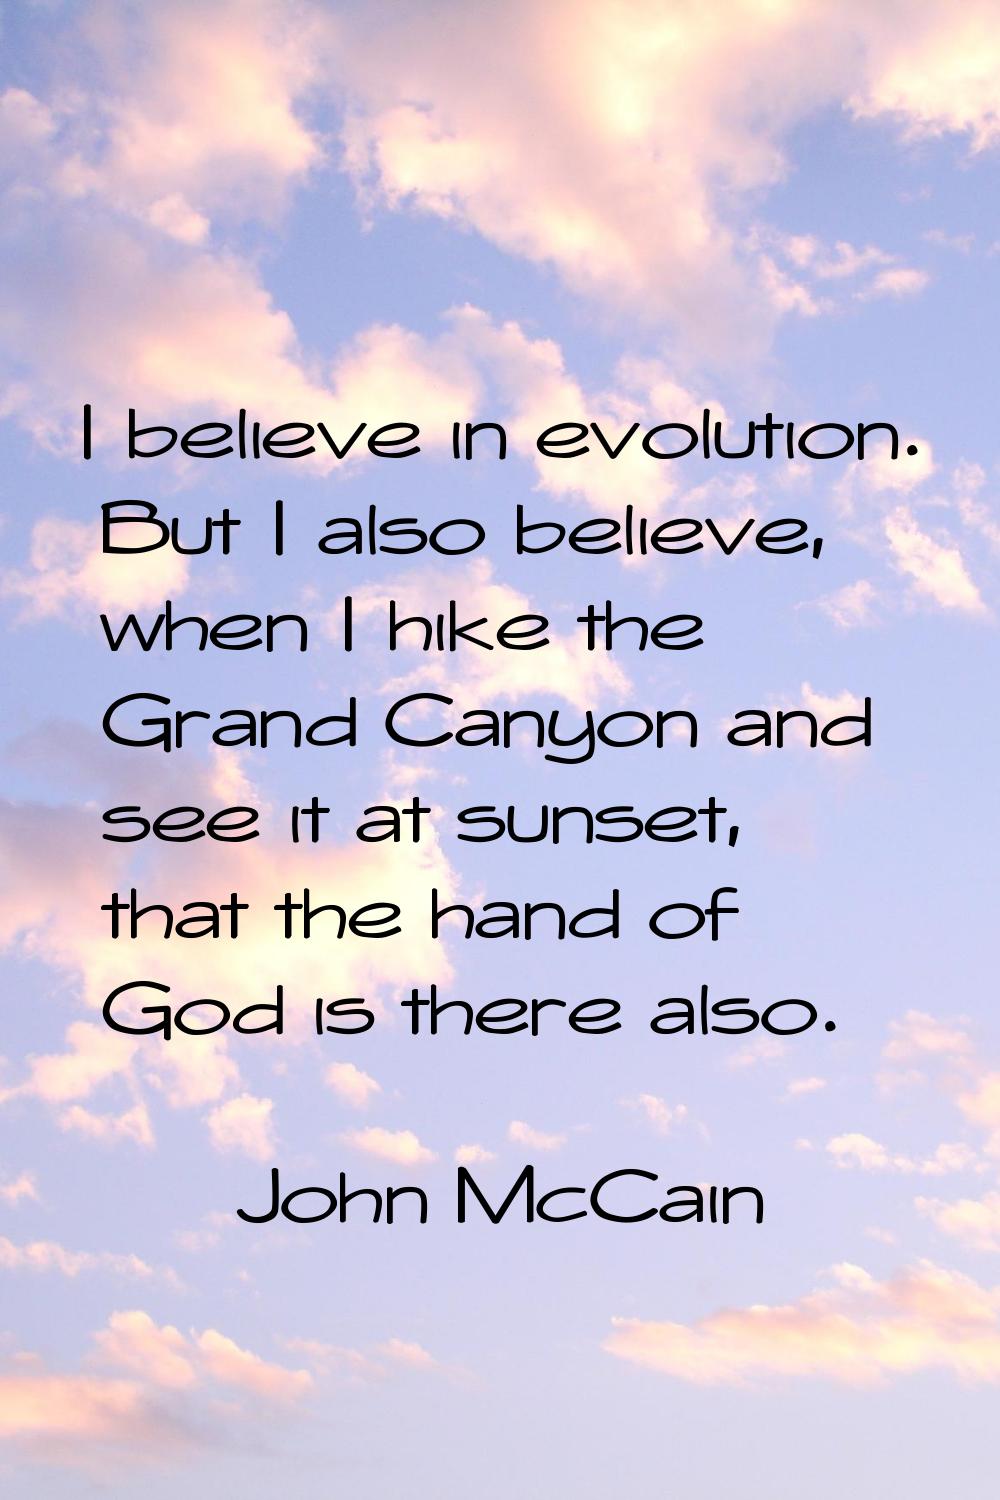 I believe in evolution. But I also believe, when I hike the Grand Canyon and see it at sunset, that